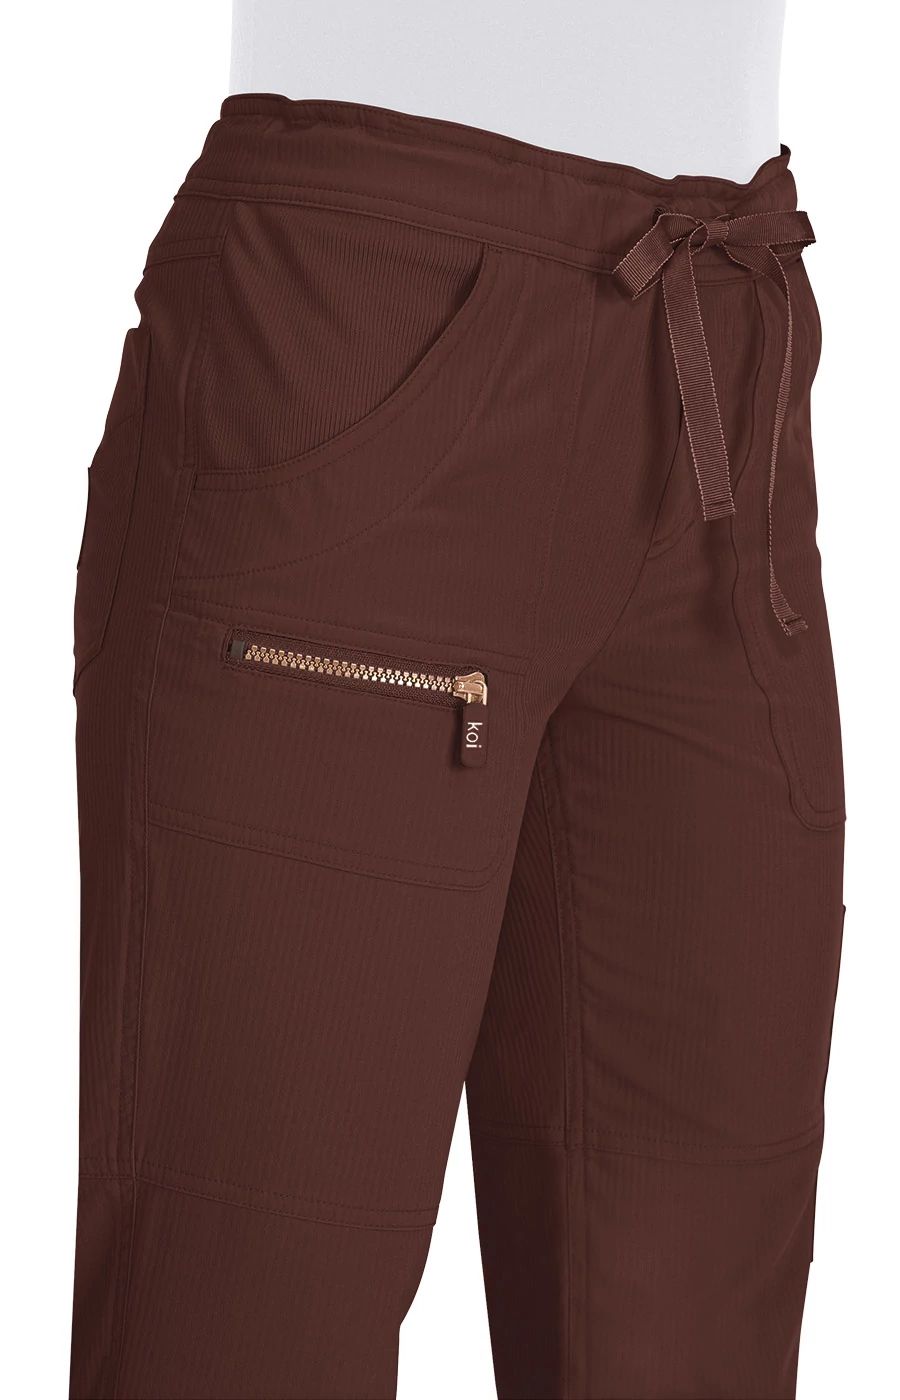 peace-pant-limited-edition-brown-taupe